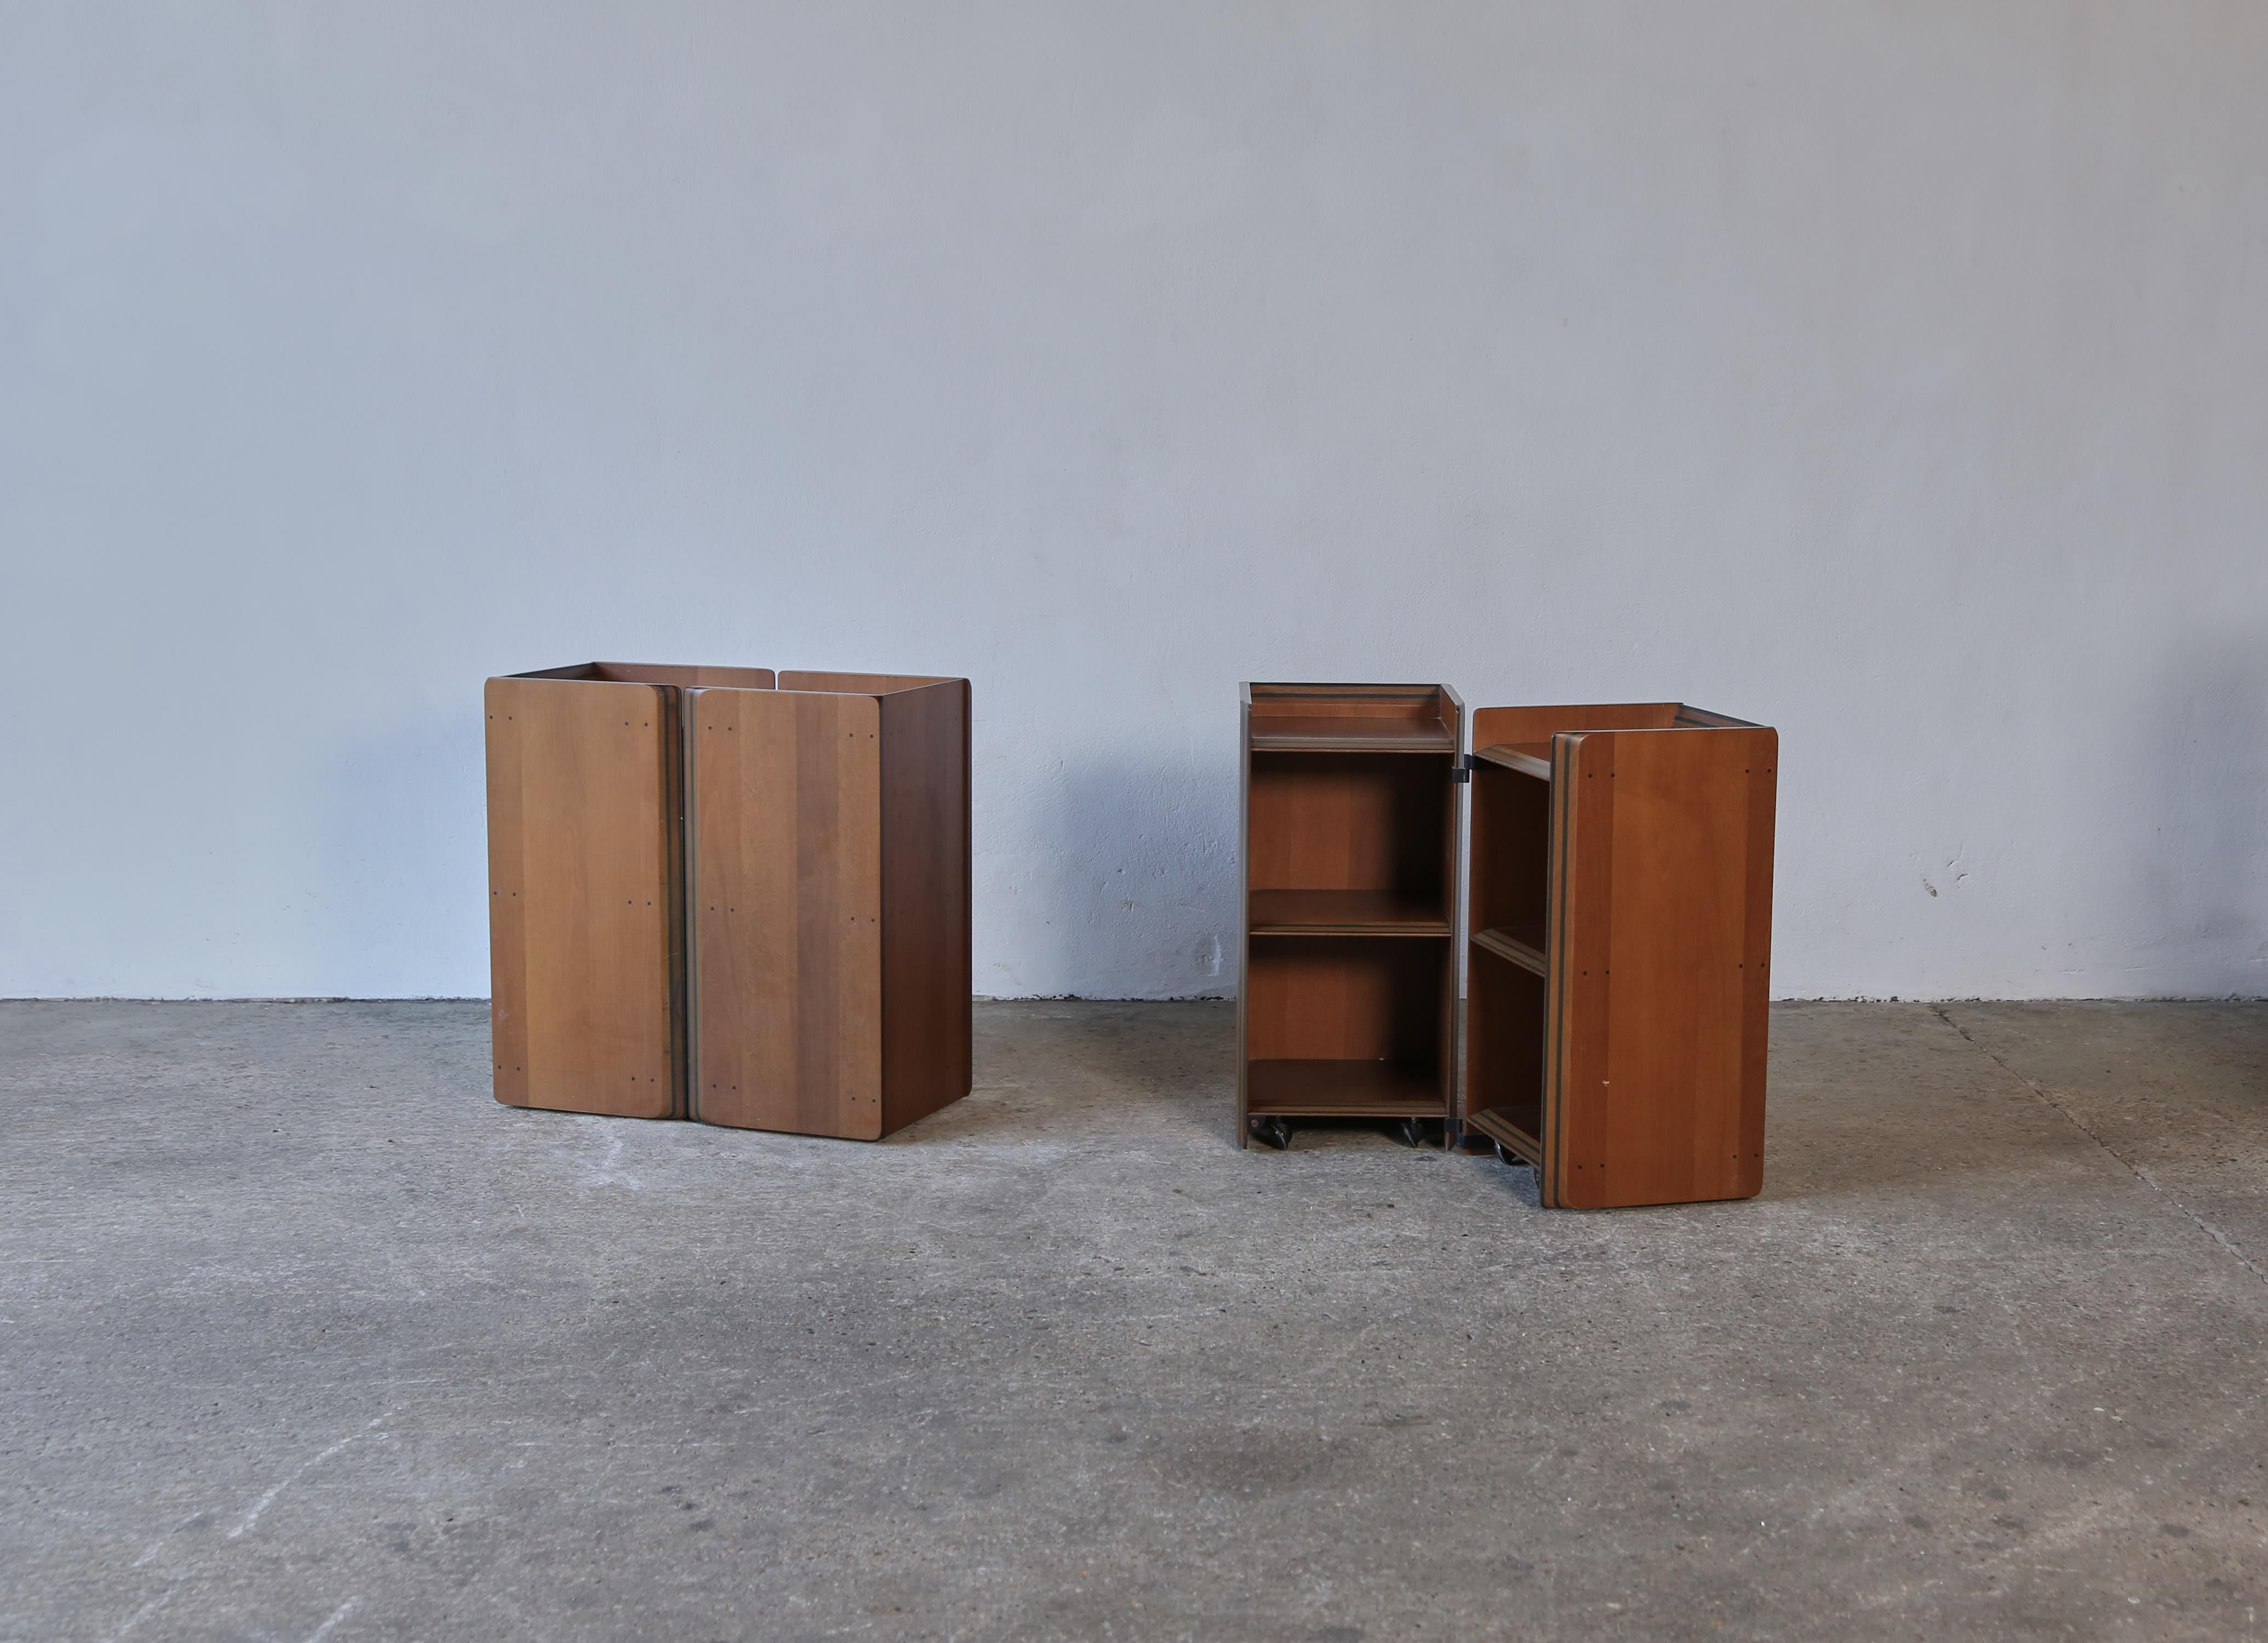 A rare, stylish and very practical pair of folding nightstands or side tables by Afra and Tobia Scarpa from the Artona series, produced by Maxalto Italy, 1970s. The nightstands are on smooth discreet wheels and fold in and out to reveal storage. In